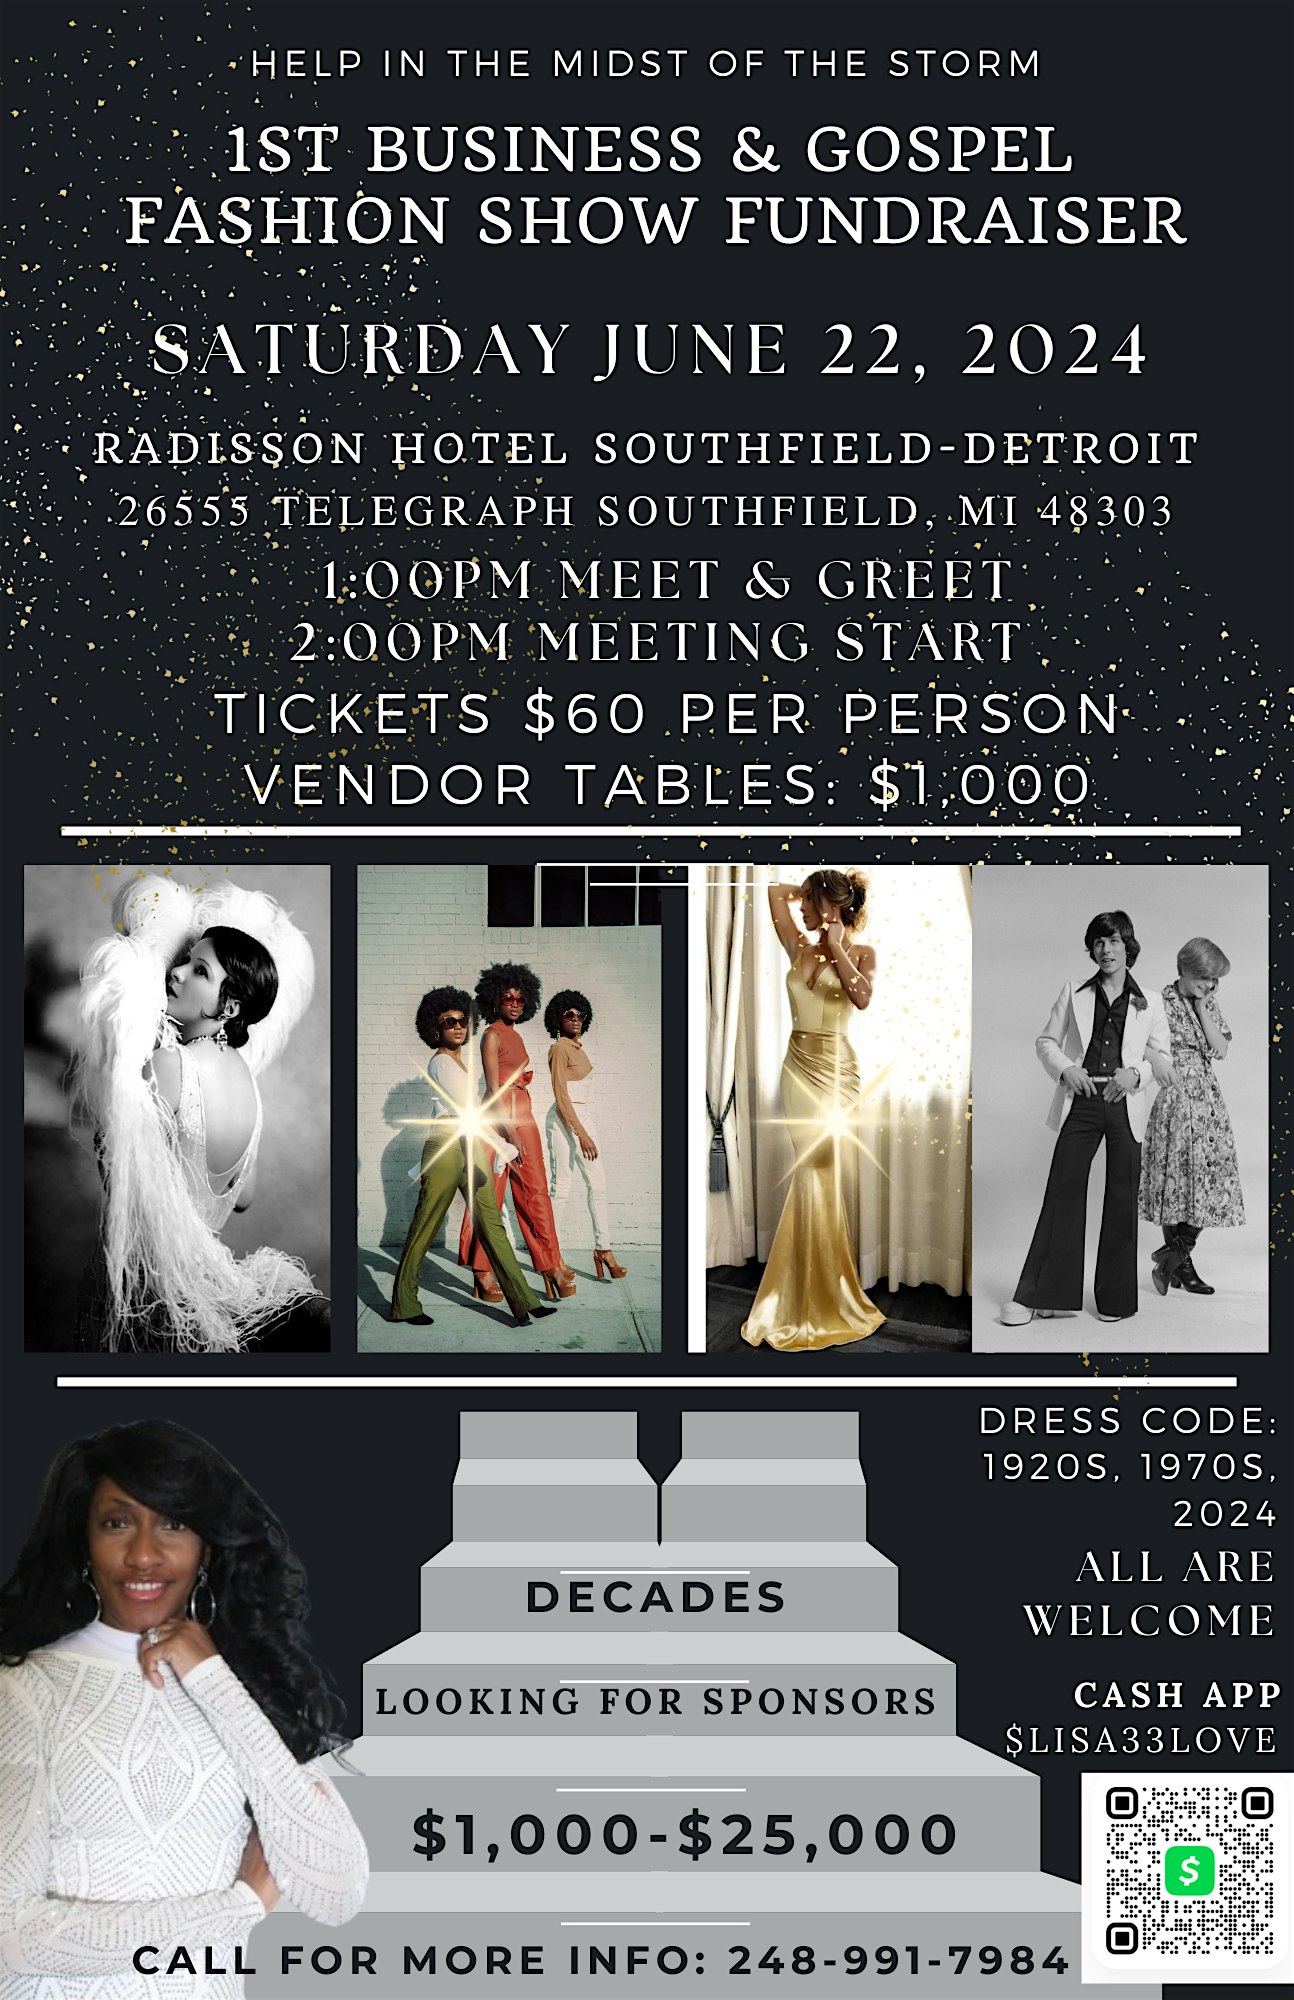 1st Business & Gospel Fashion Show - Help in the Midst of the Storm